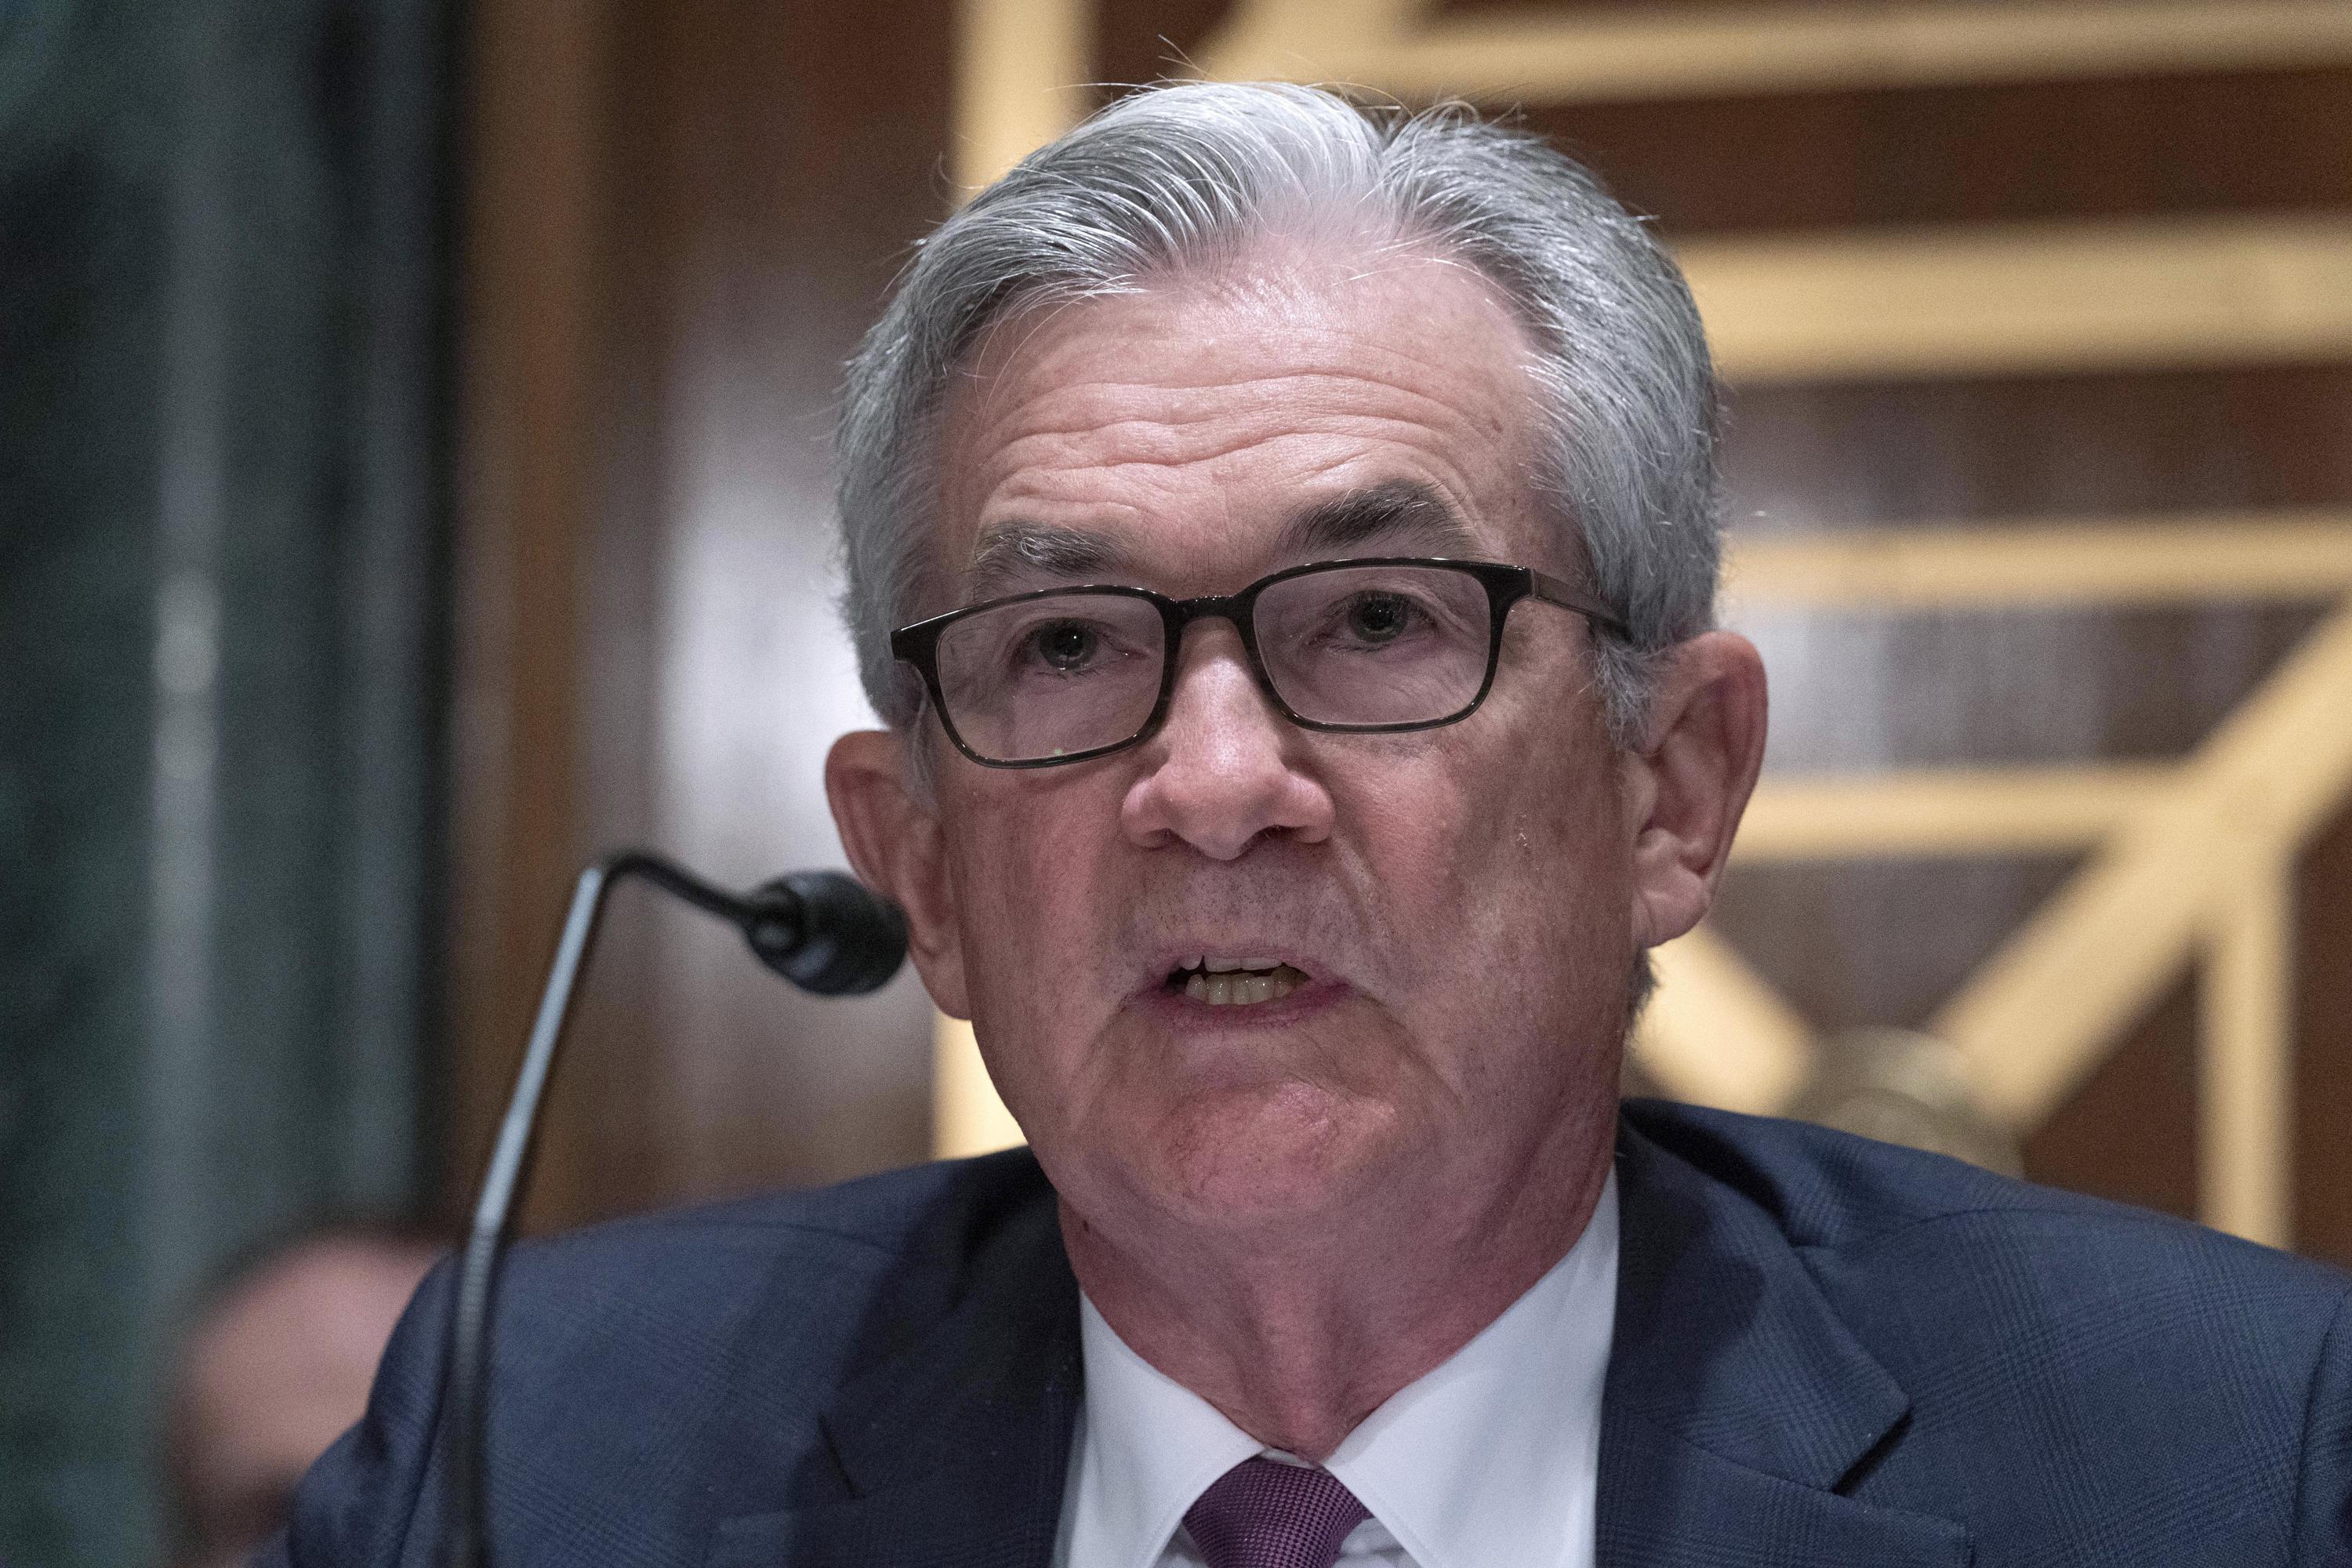 WASHINGTON (AP) — Federal Reserve Chairman Jerome Powell said Tuesday that the U.S. economy has been permanently changed by the COVID pandemic and i